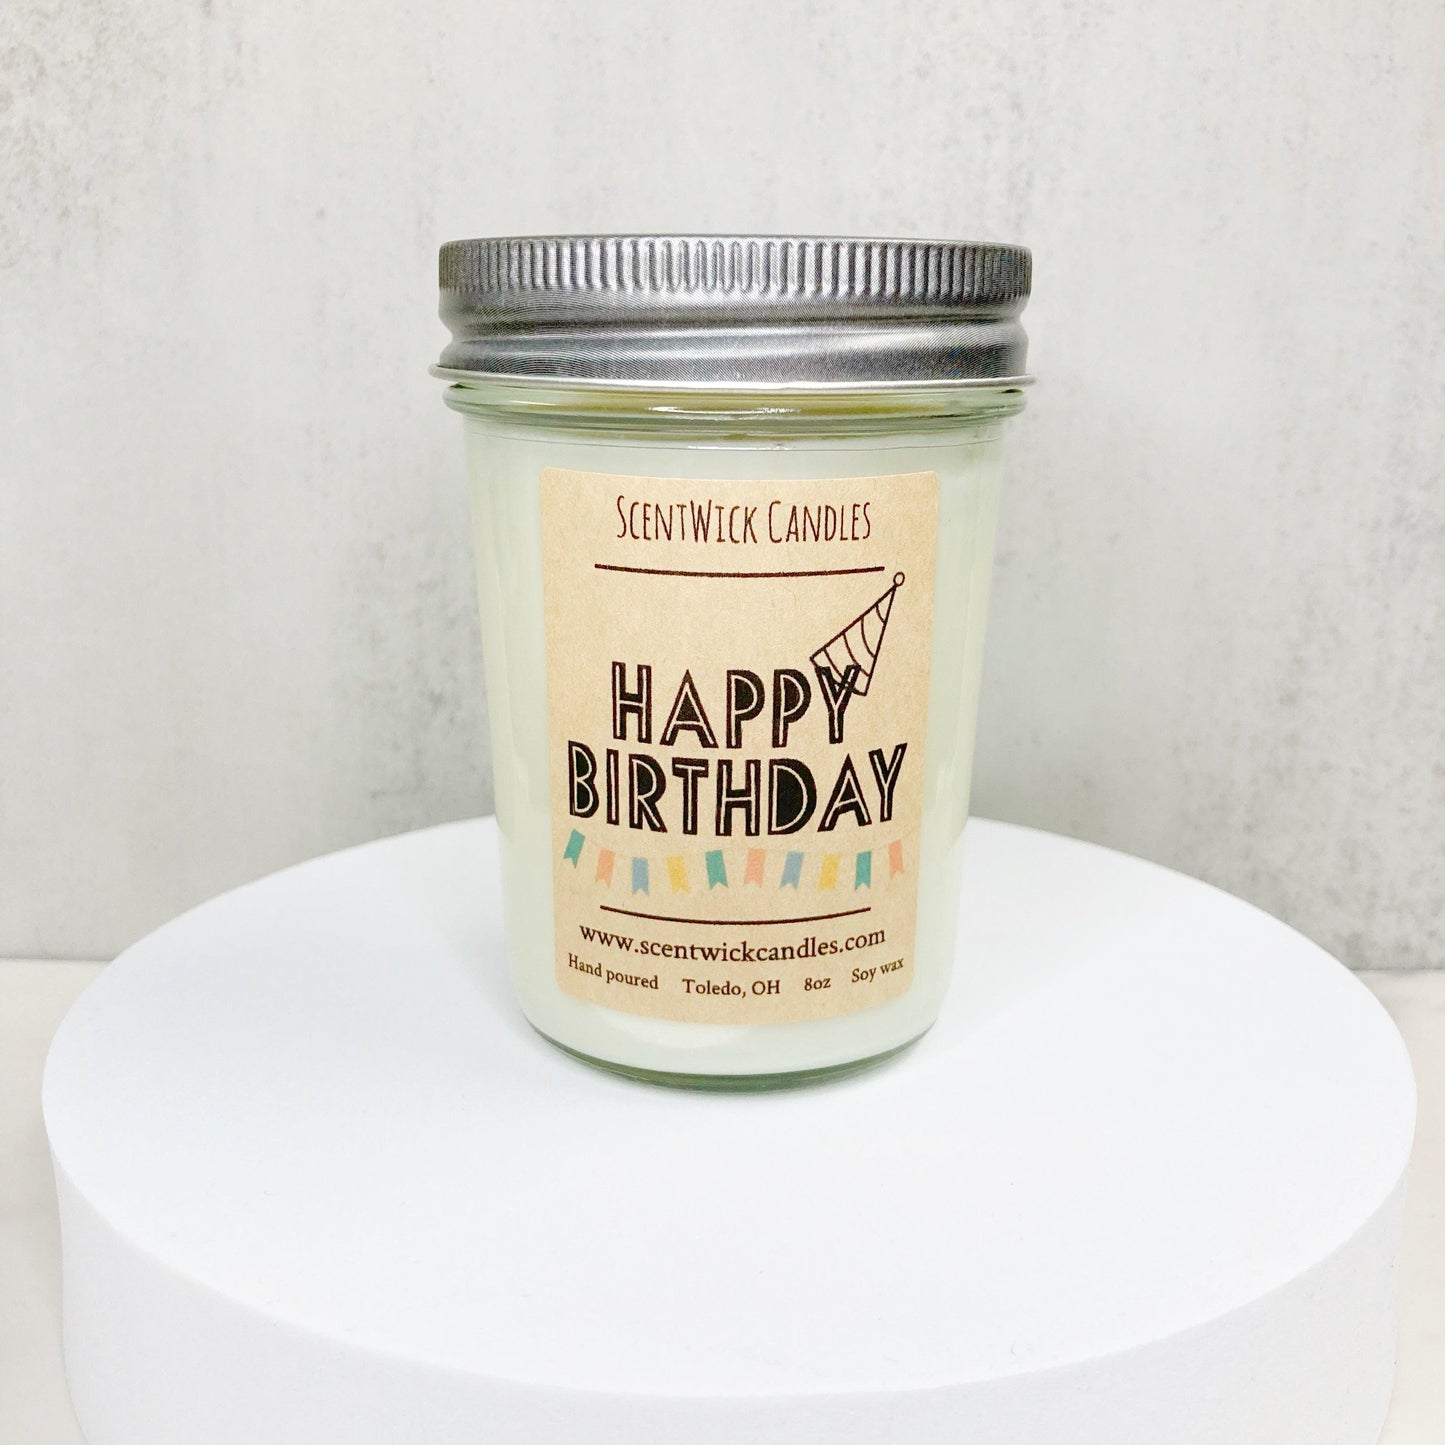 Birthday Cake Candle - ScentWick Candles